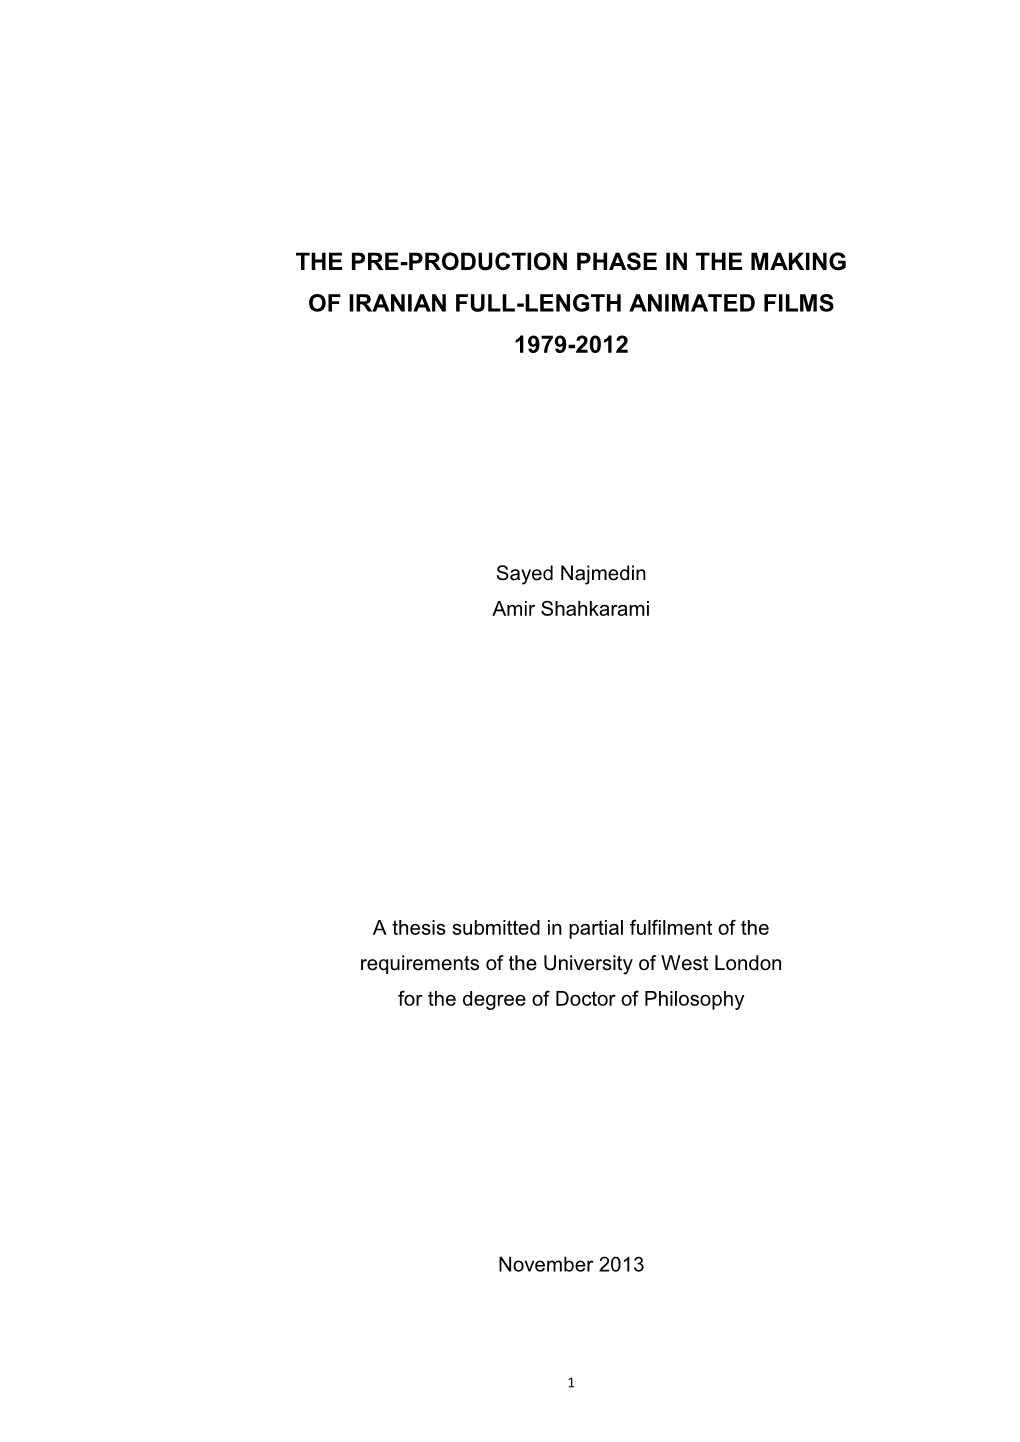 The Pre-Production Phase in the Making of Iranian Full-Length Animated Films 1979-2012